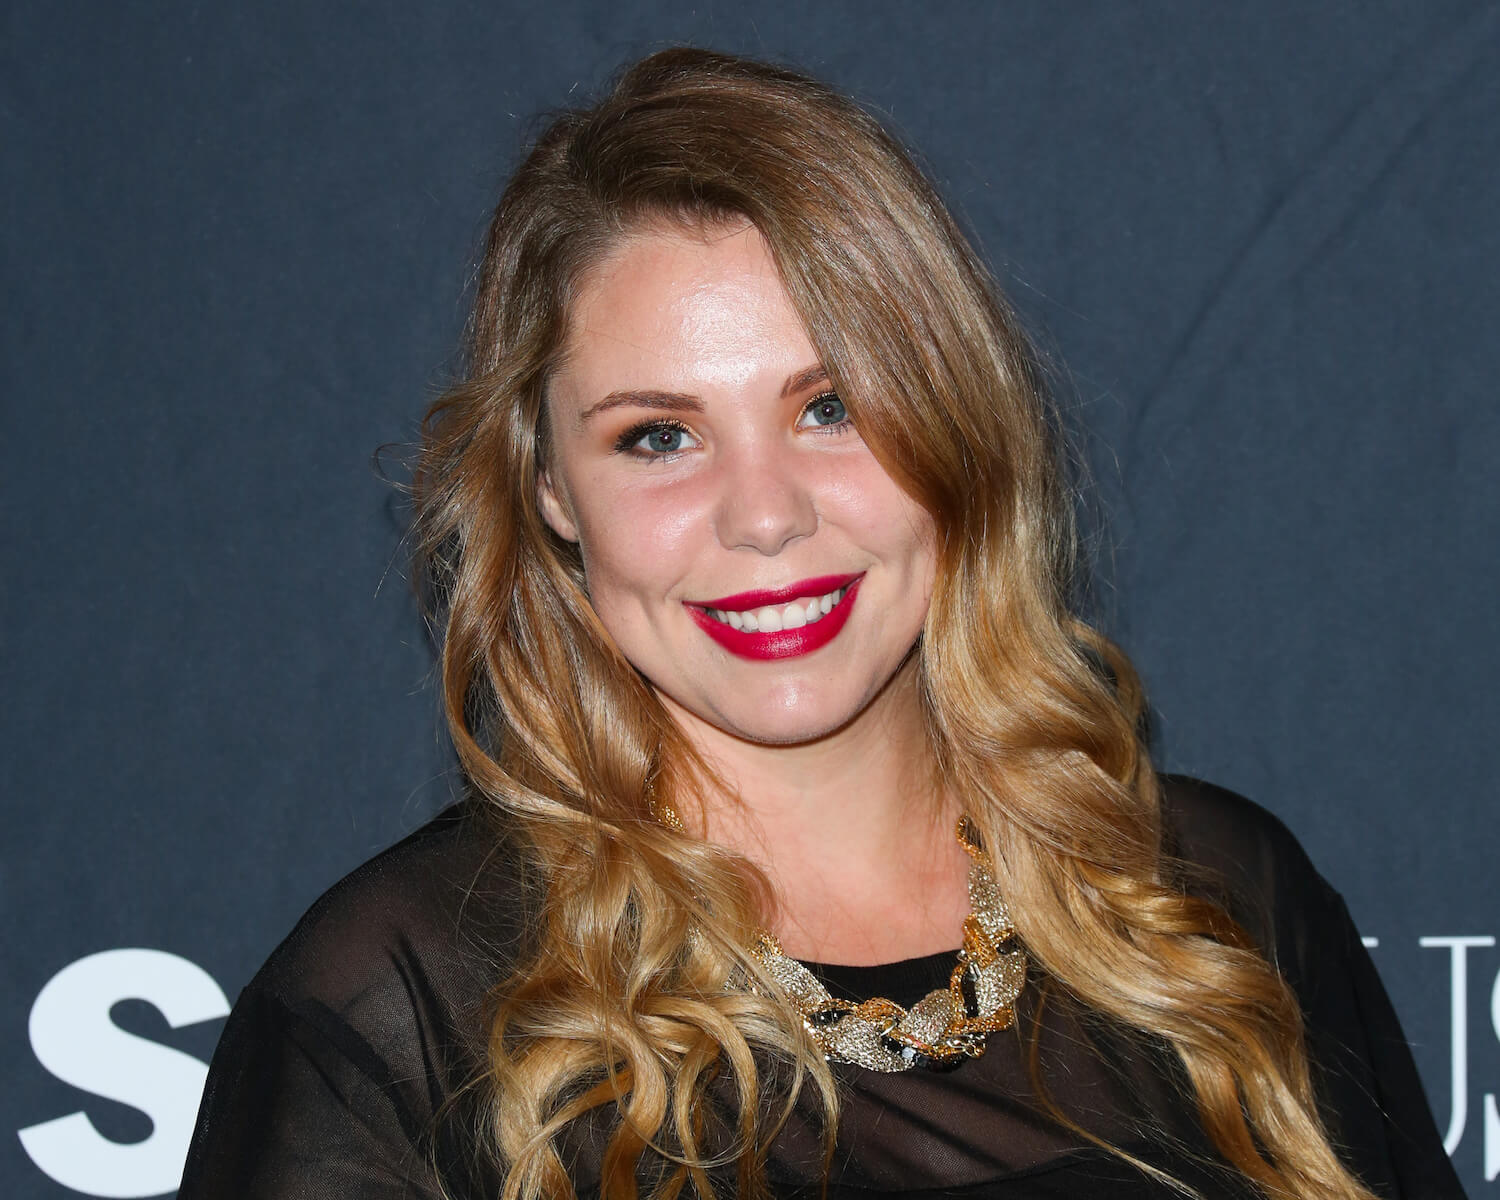 'Teen Mom 2' star Kailyn Lowry smiling